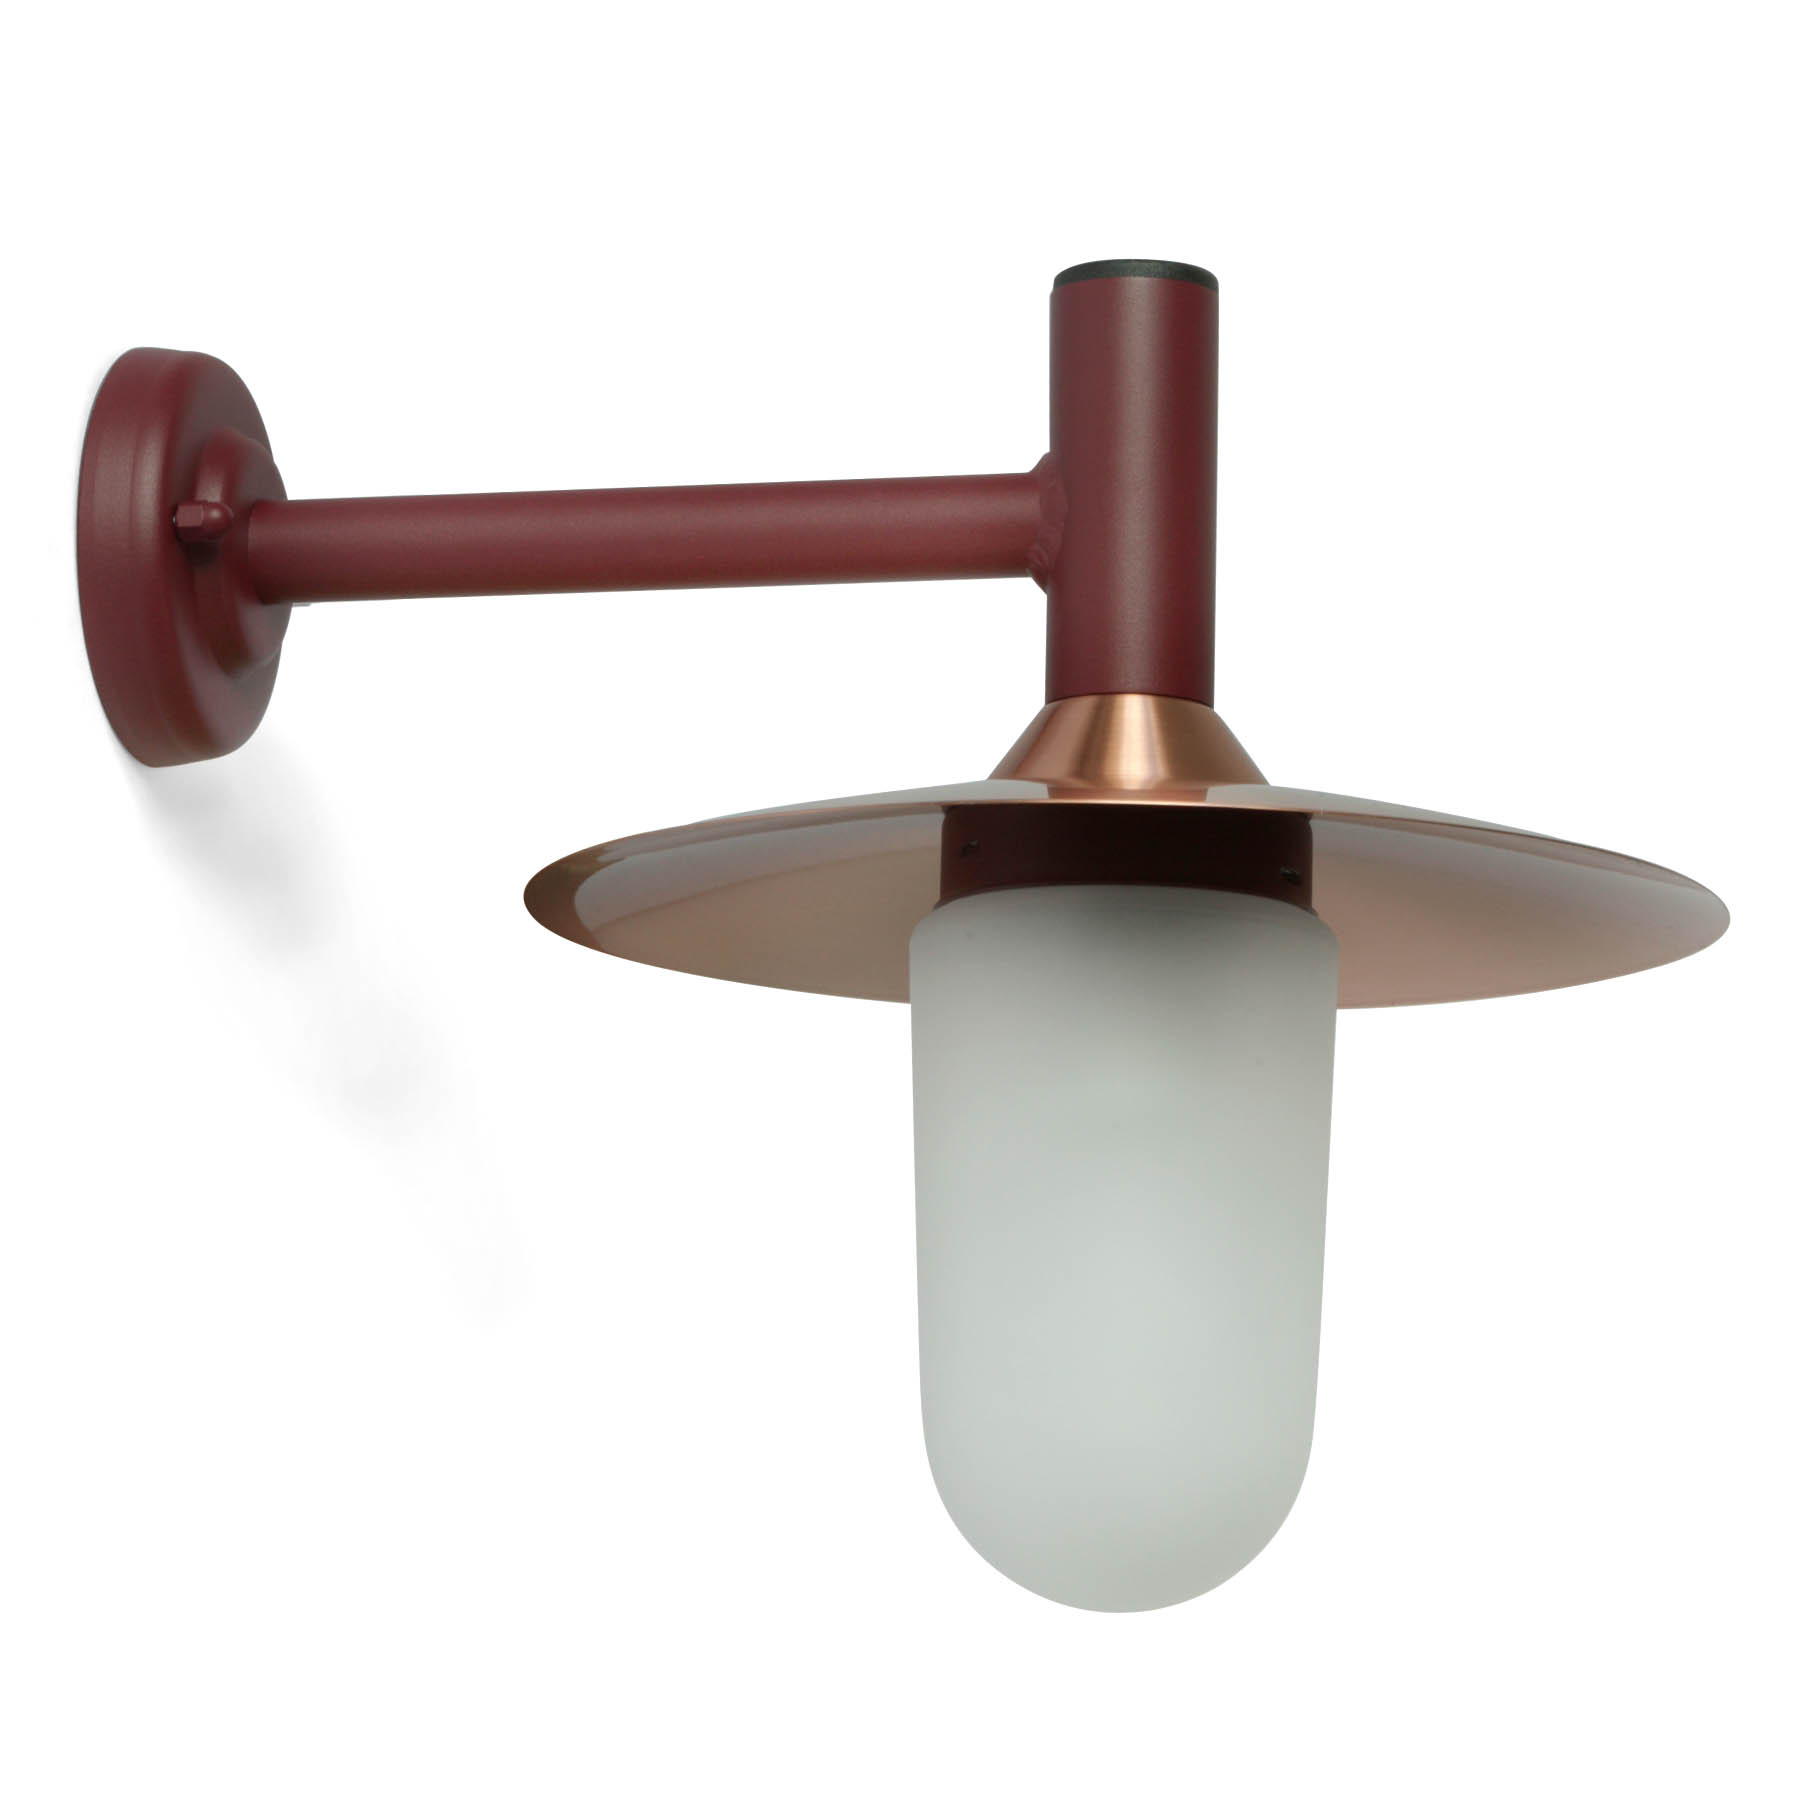 Classic French Reflector Sconce Montana 1: Farbe Bordeaux (Weinrot RAL 3005) mit Kupferreflektor